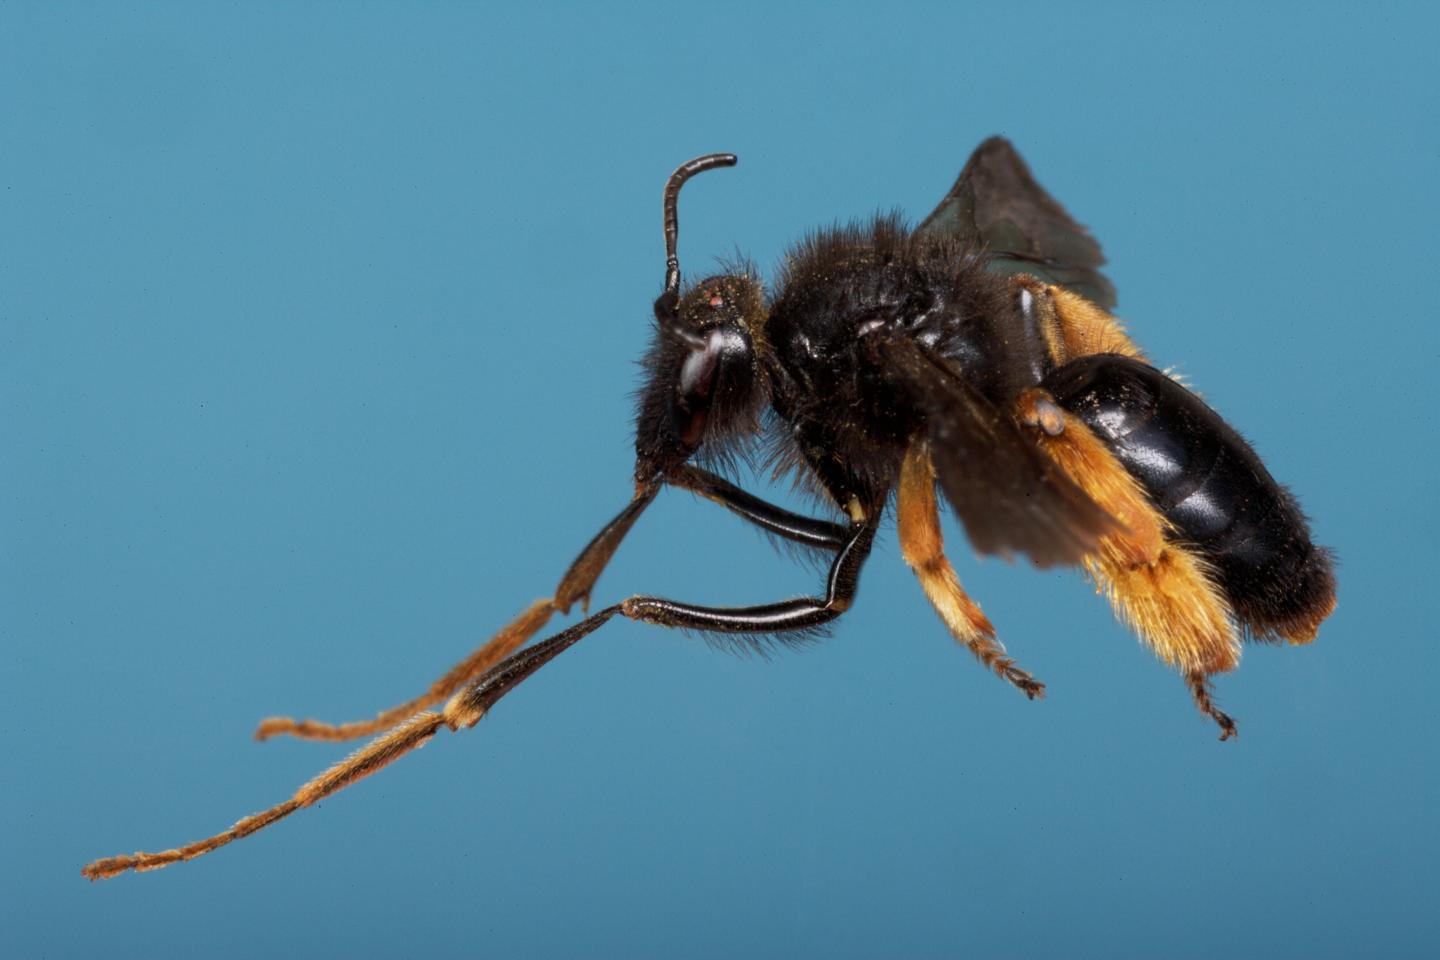 Unusual Long Legs for South Africa's Rediviva Bees